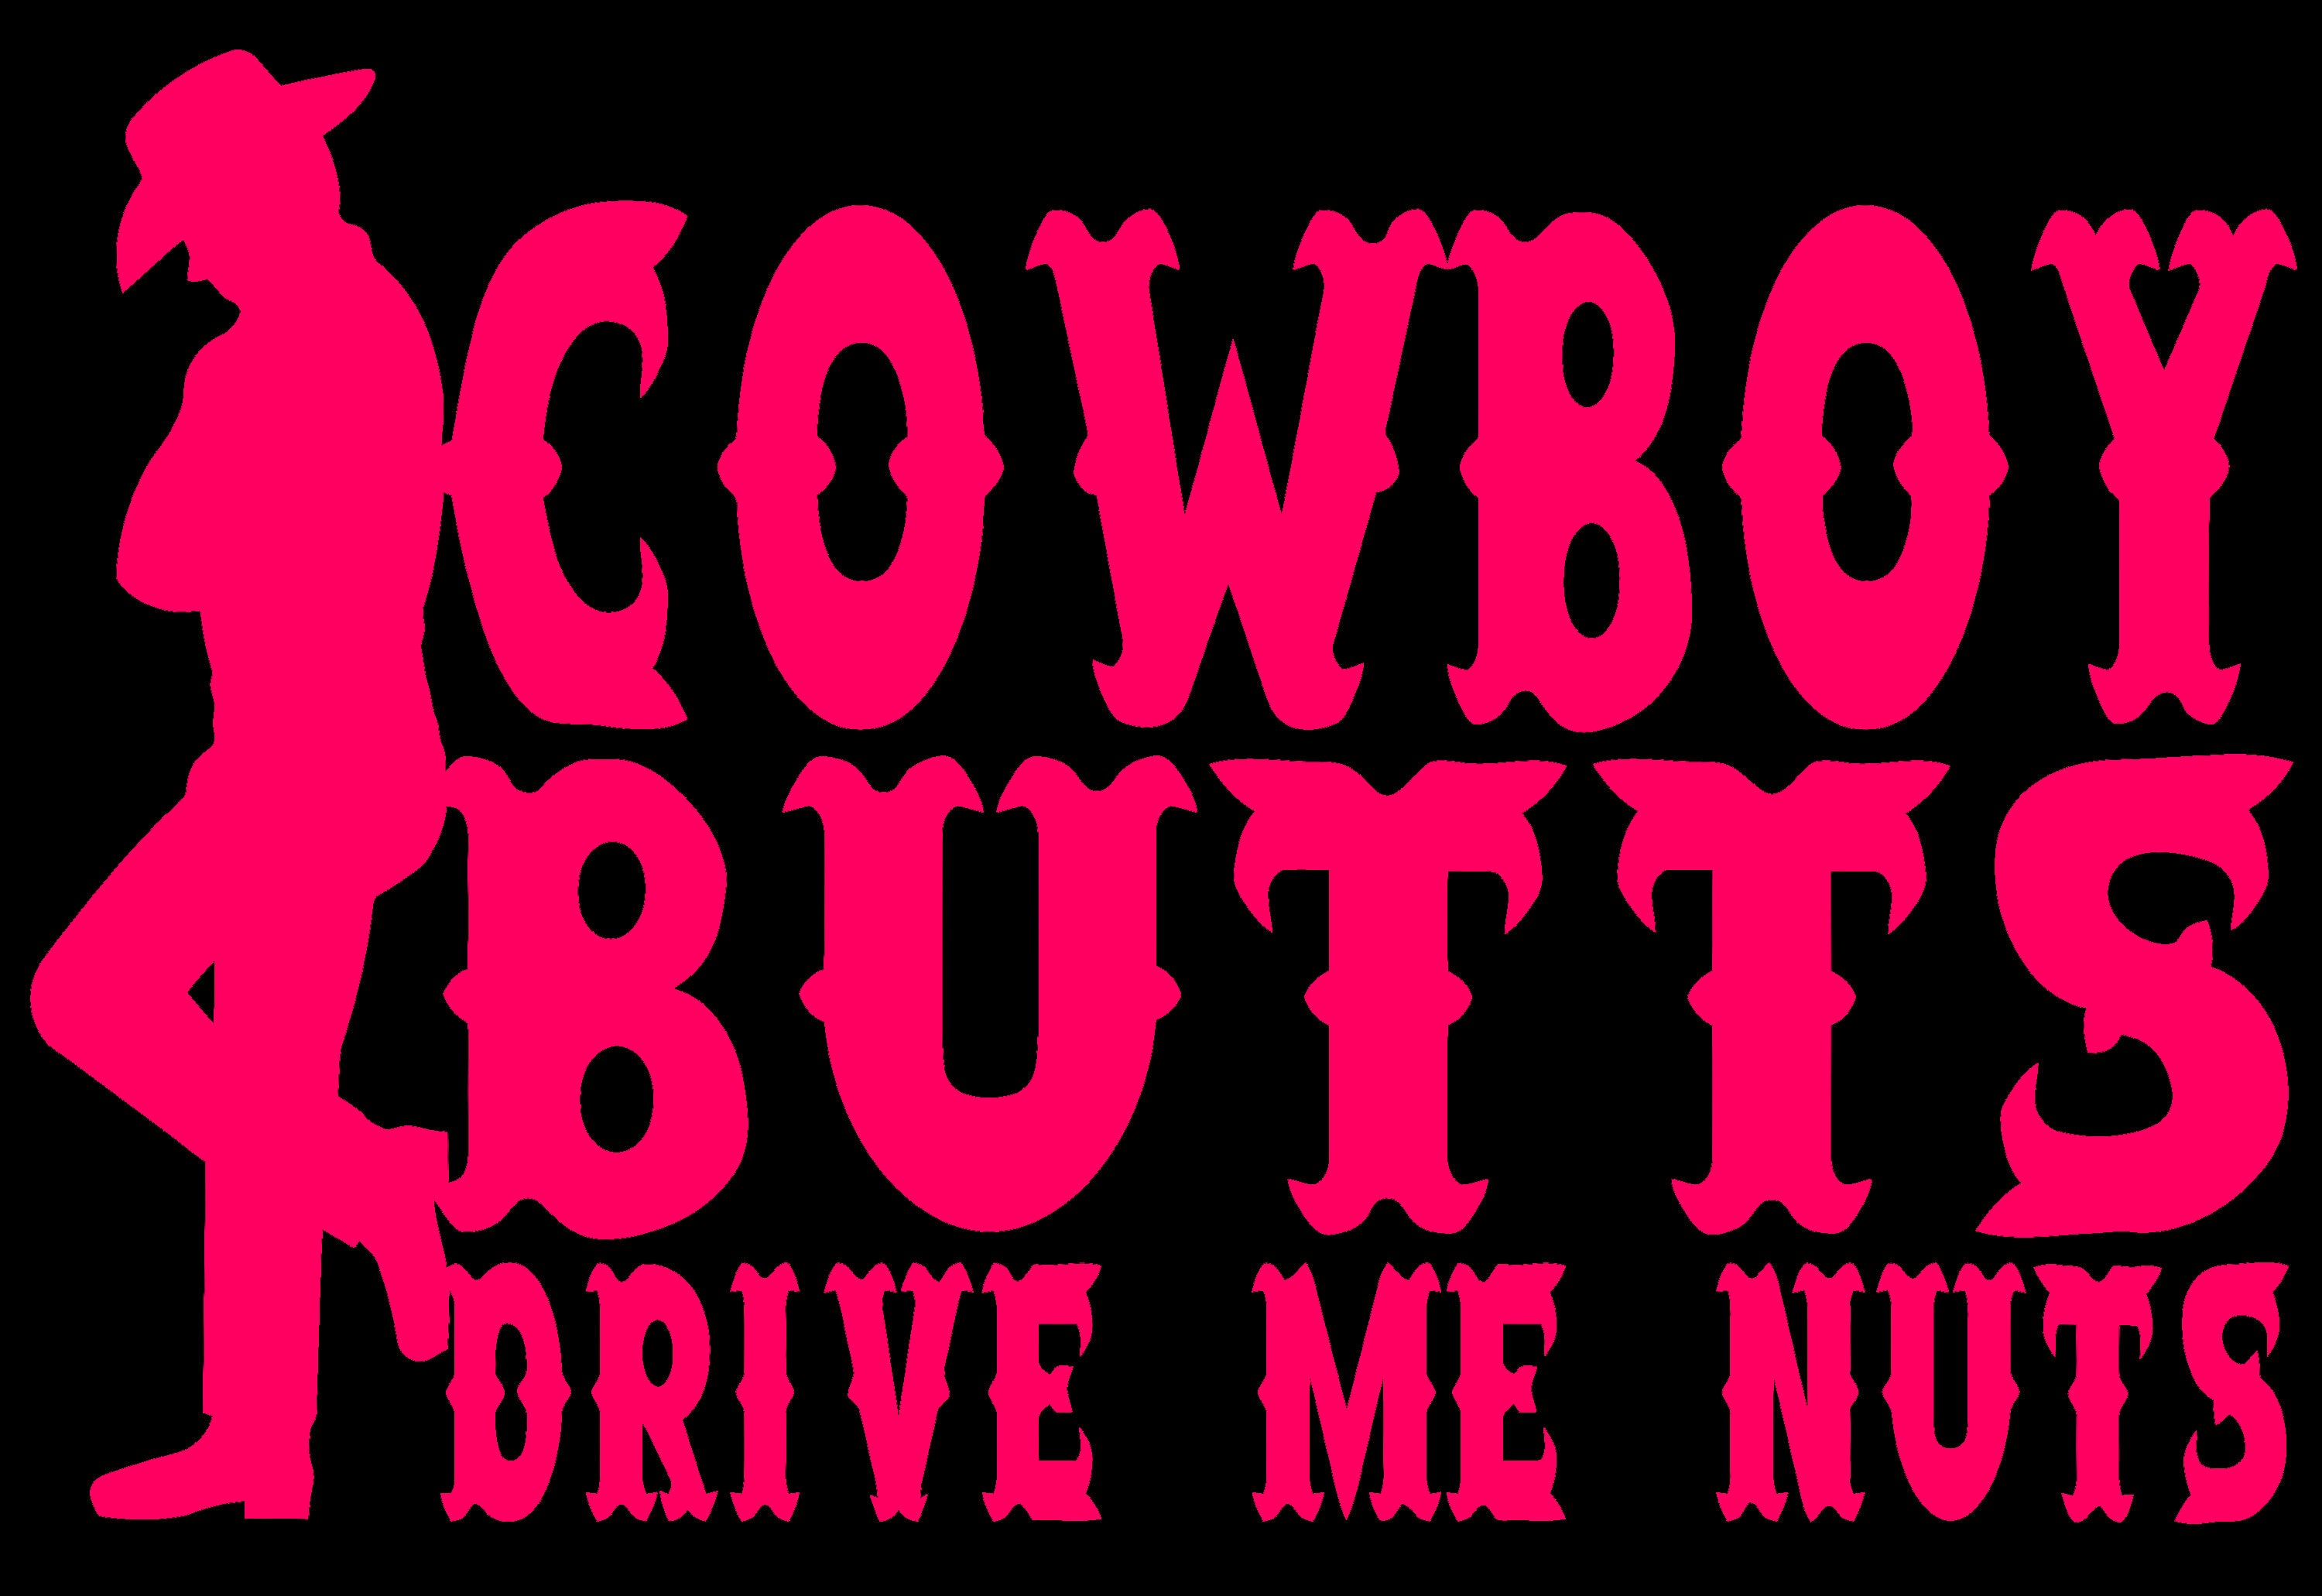 Cowboy Butts Drive Me Nuts Vinyl Decal - Etsy